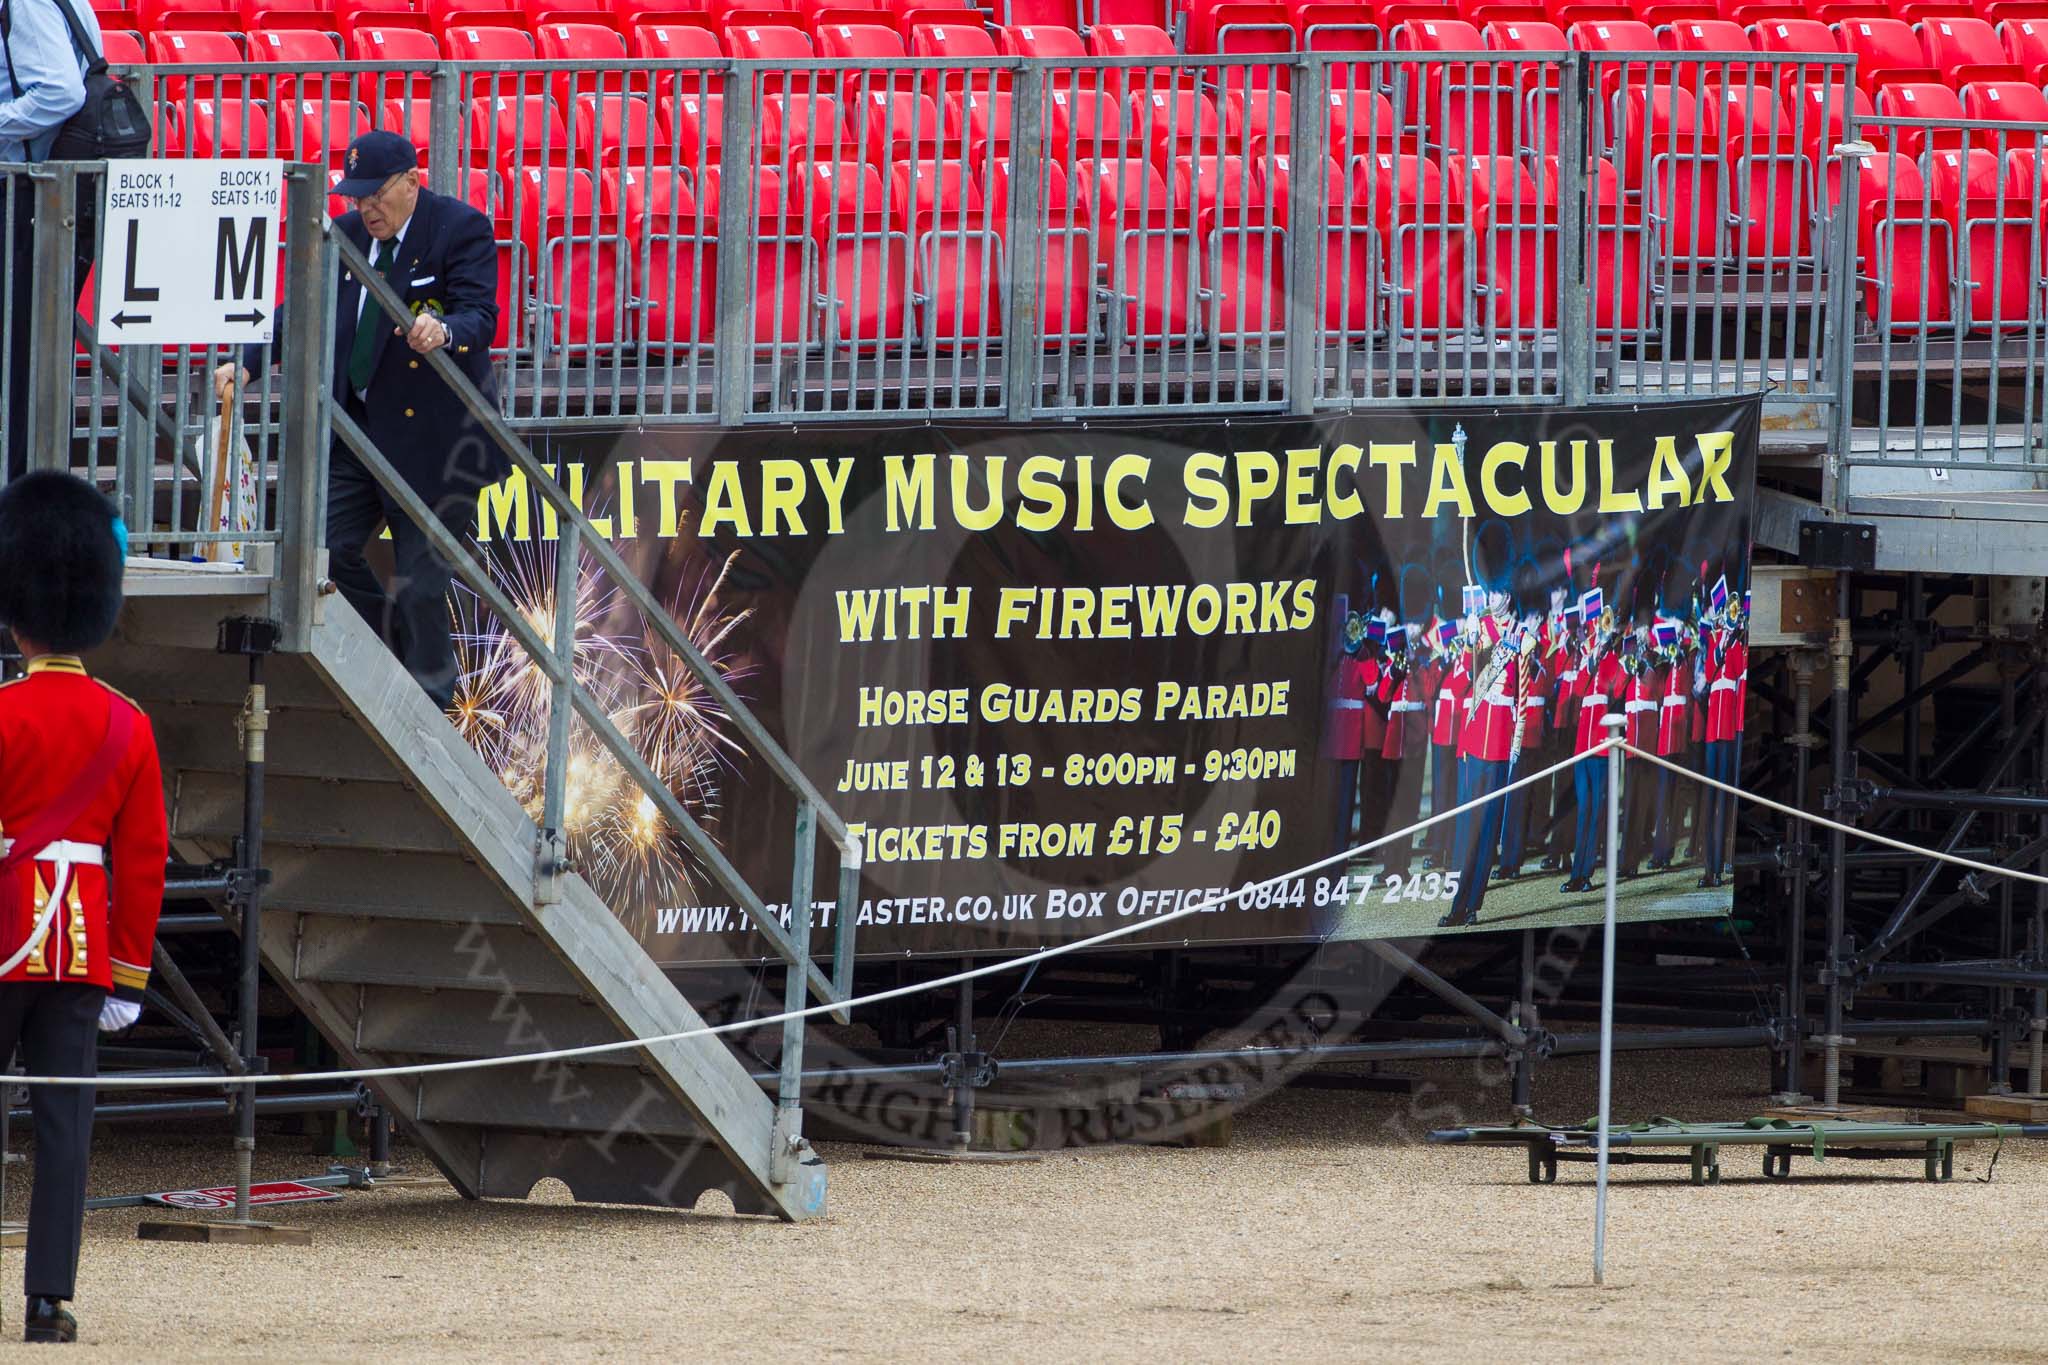 Advertising 'Beating Retreat' on the grandstands around Horse Guards Parade